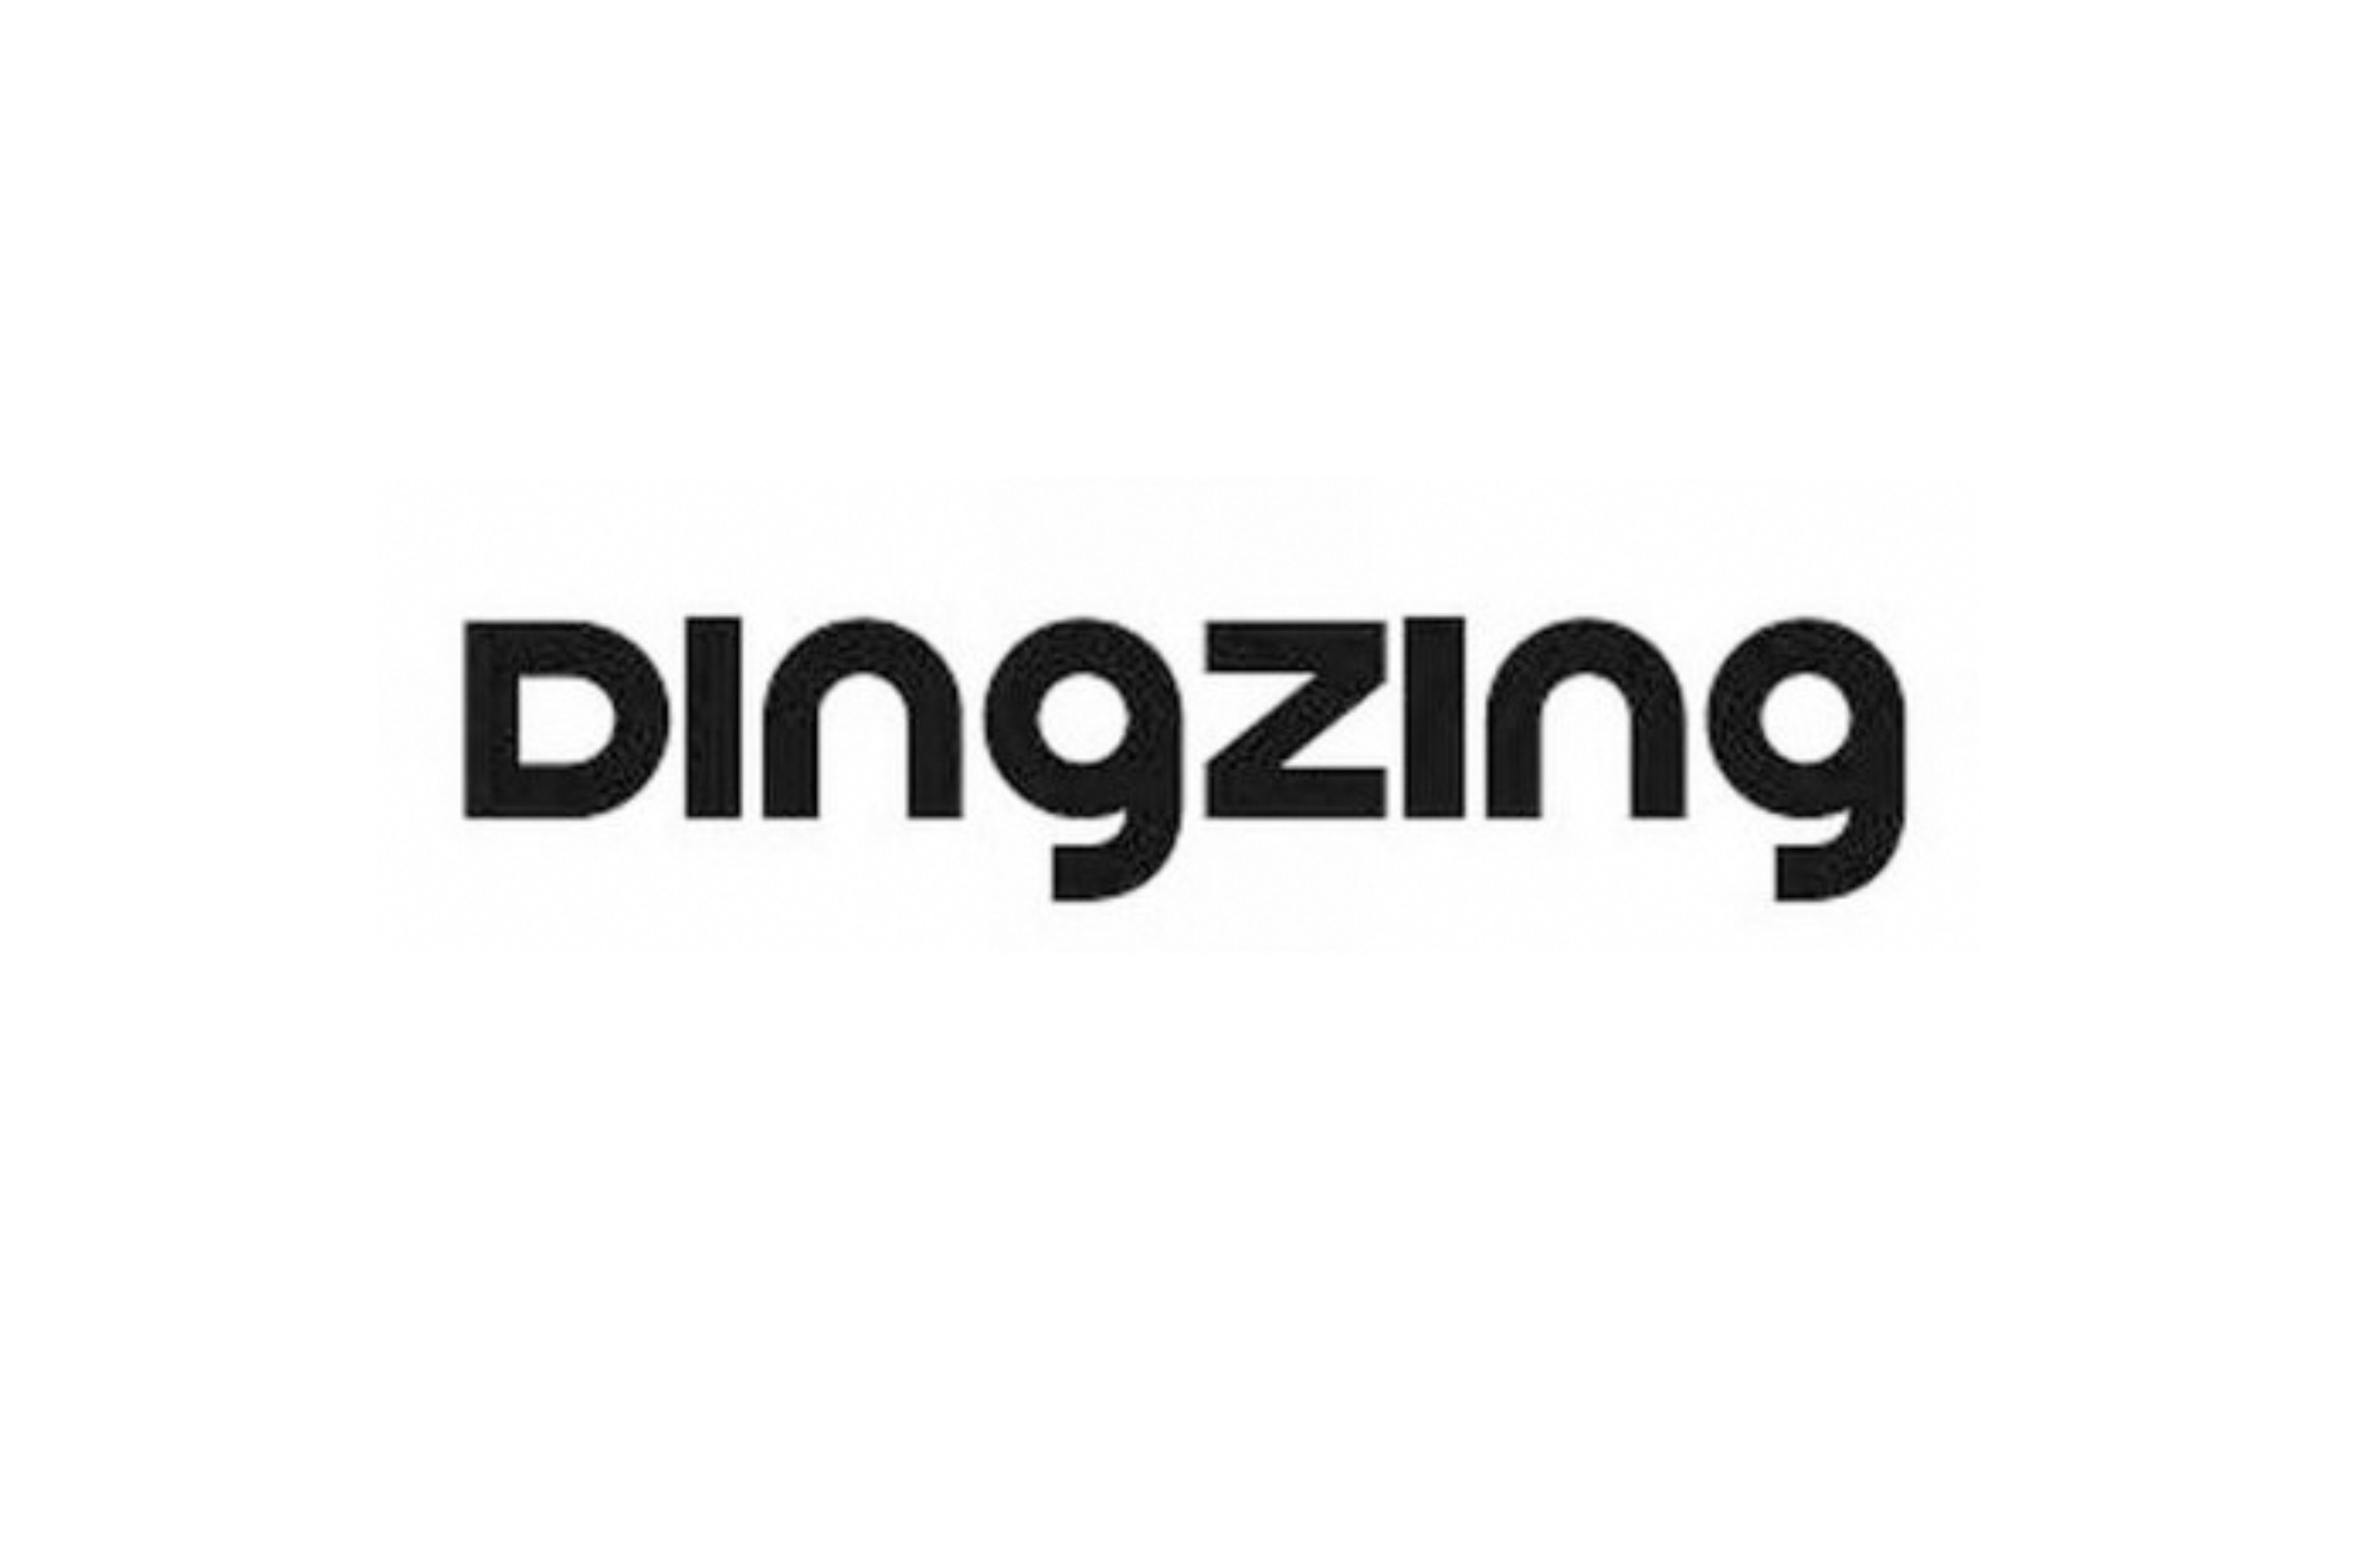 The brands DINGZING